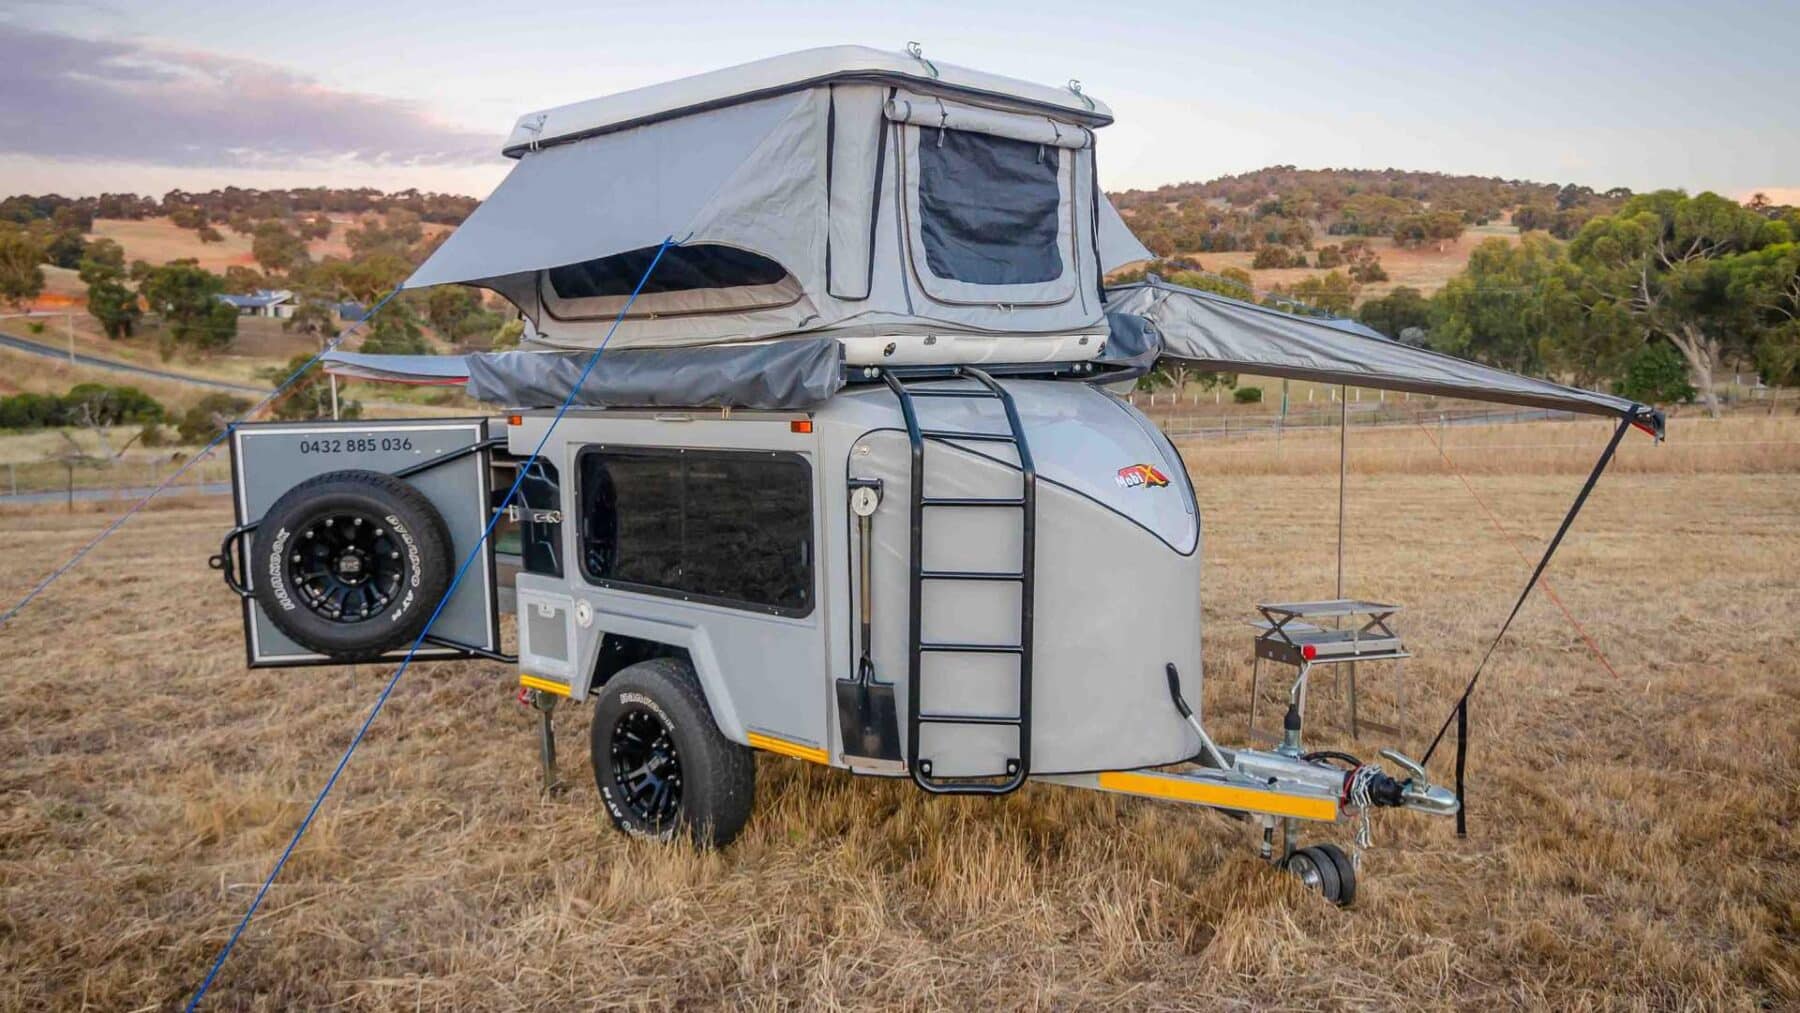 This caravan is a true 'Transformer' with capacity for up to six adults